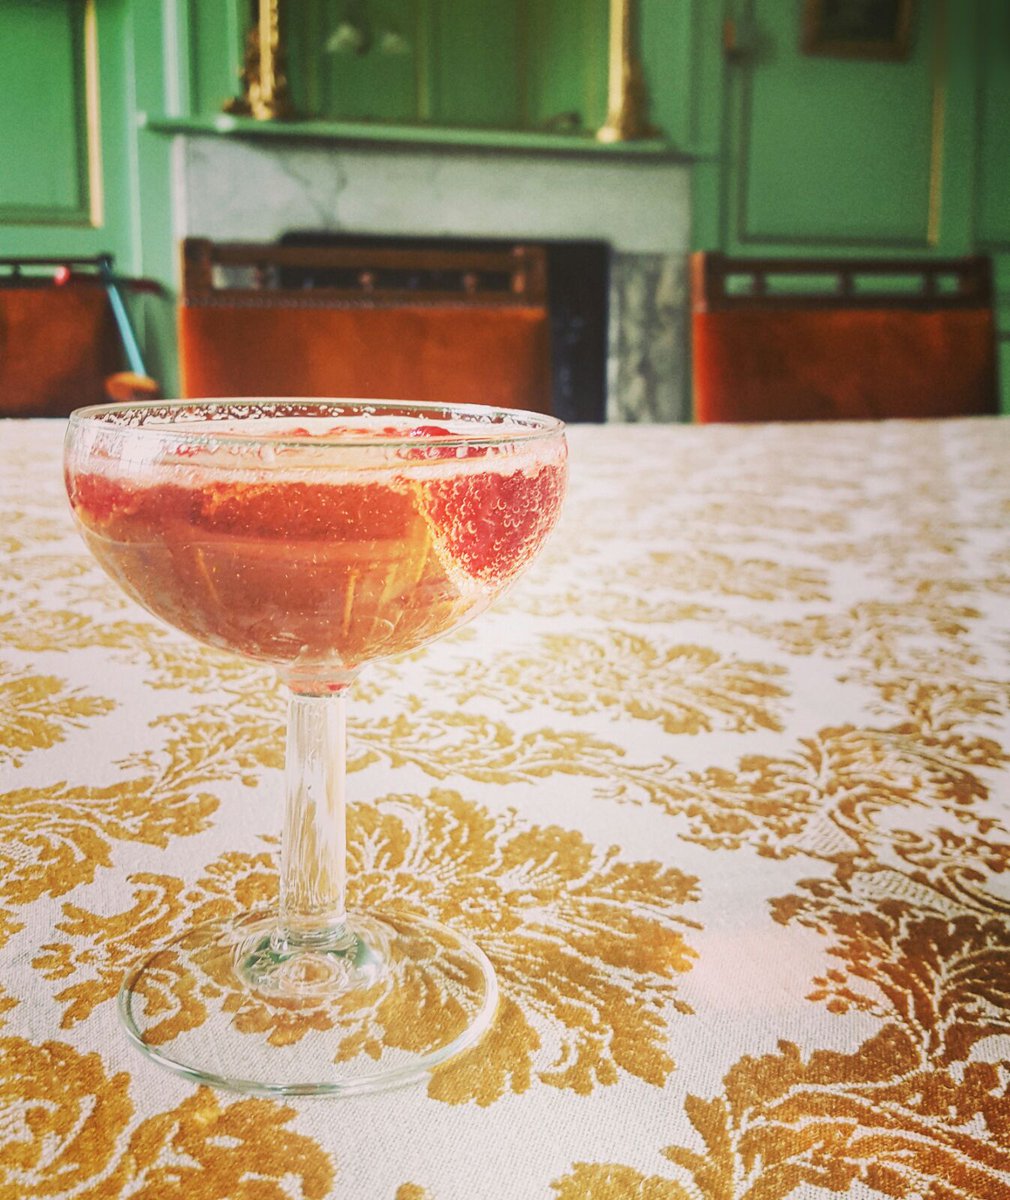 Our cocktail of the month is a Raspberry Royale! Go to our Facebook page for the recipe! Have a great weekend all x